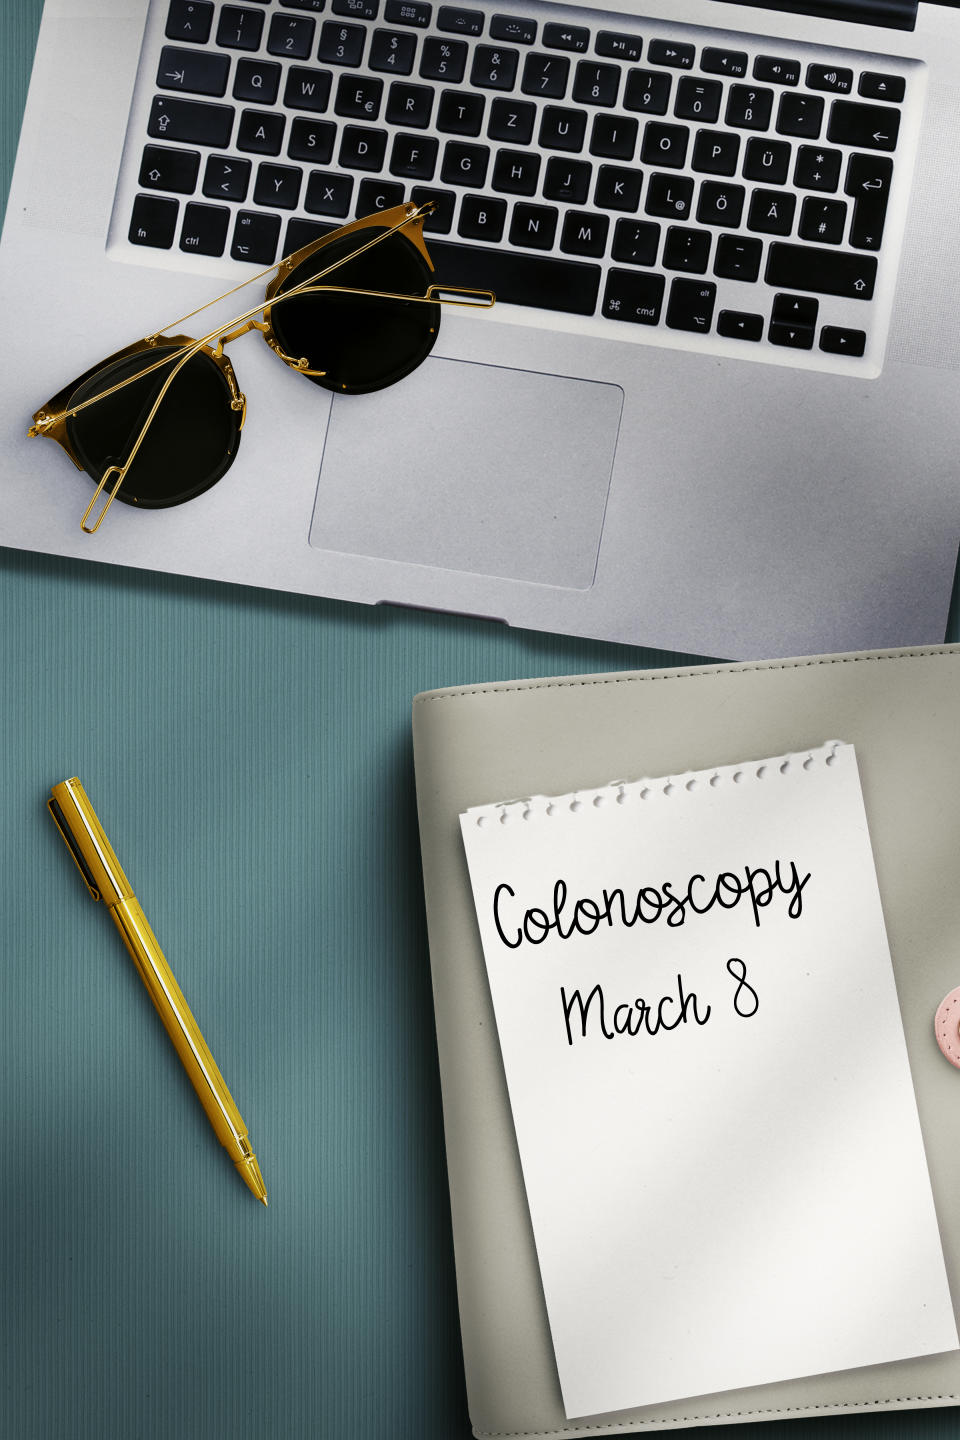 Notepad with handwritten 'Colonoscopy March 8' beside laptop, sunglasses, and pen